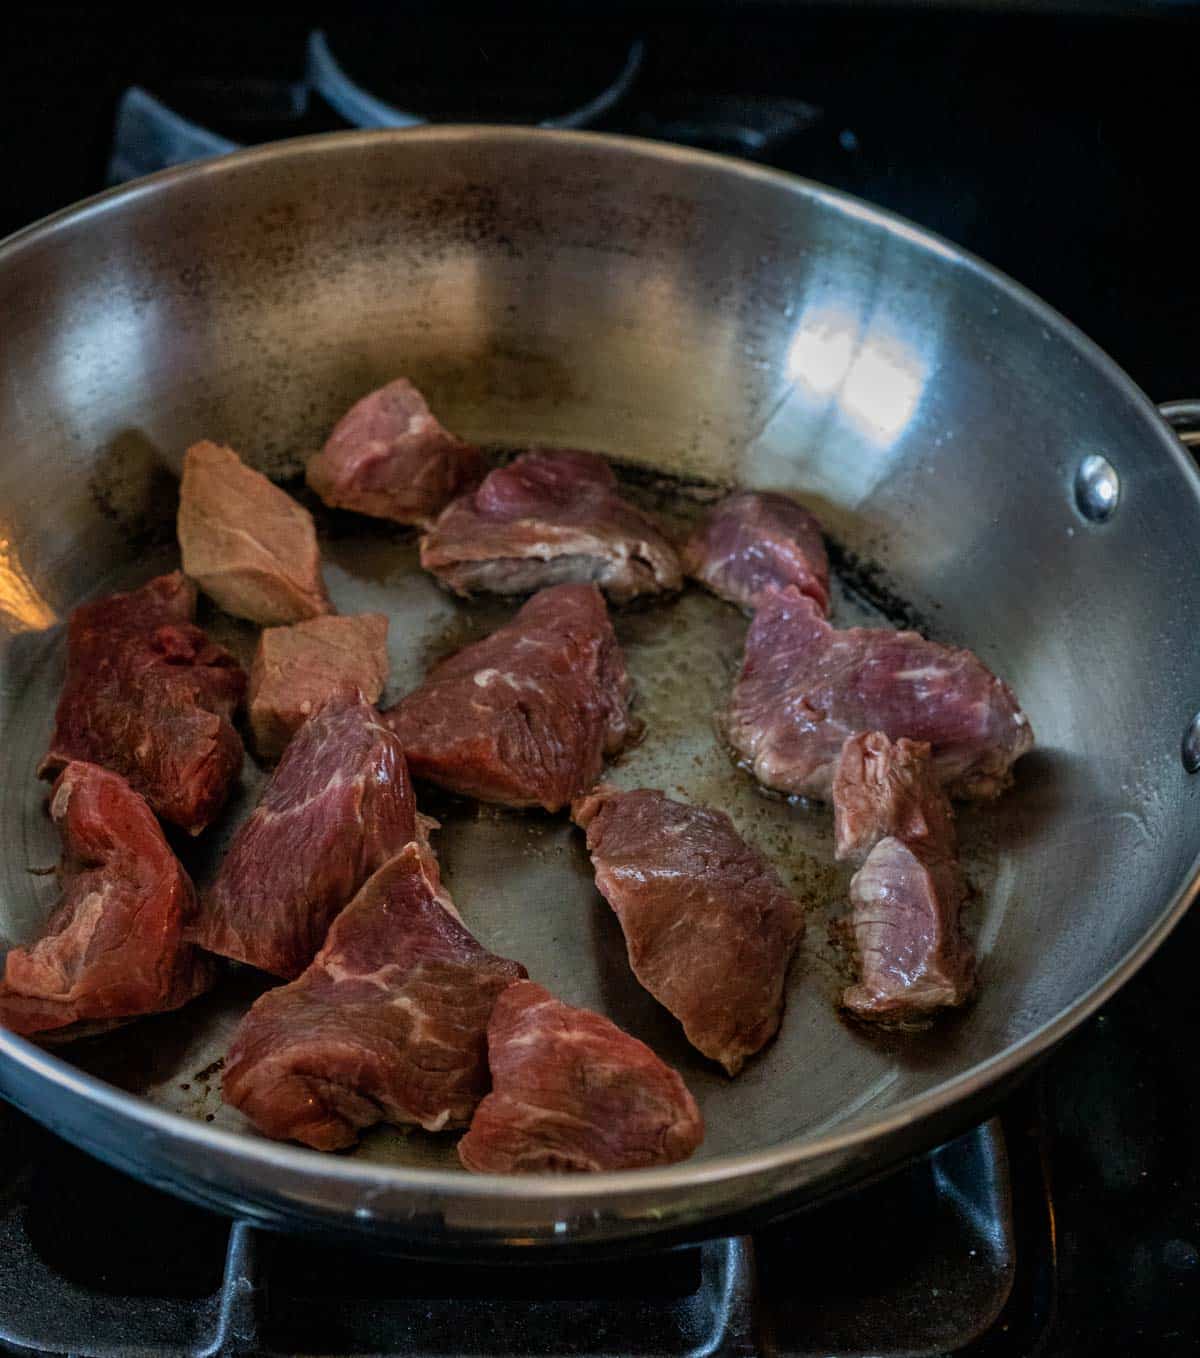 Beef browning in a skillet on the stovetop.